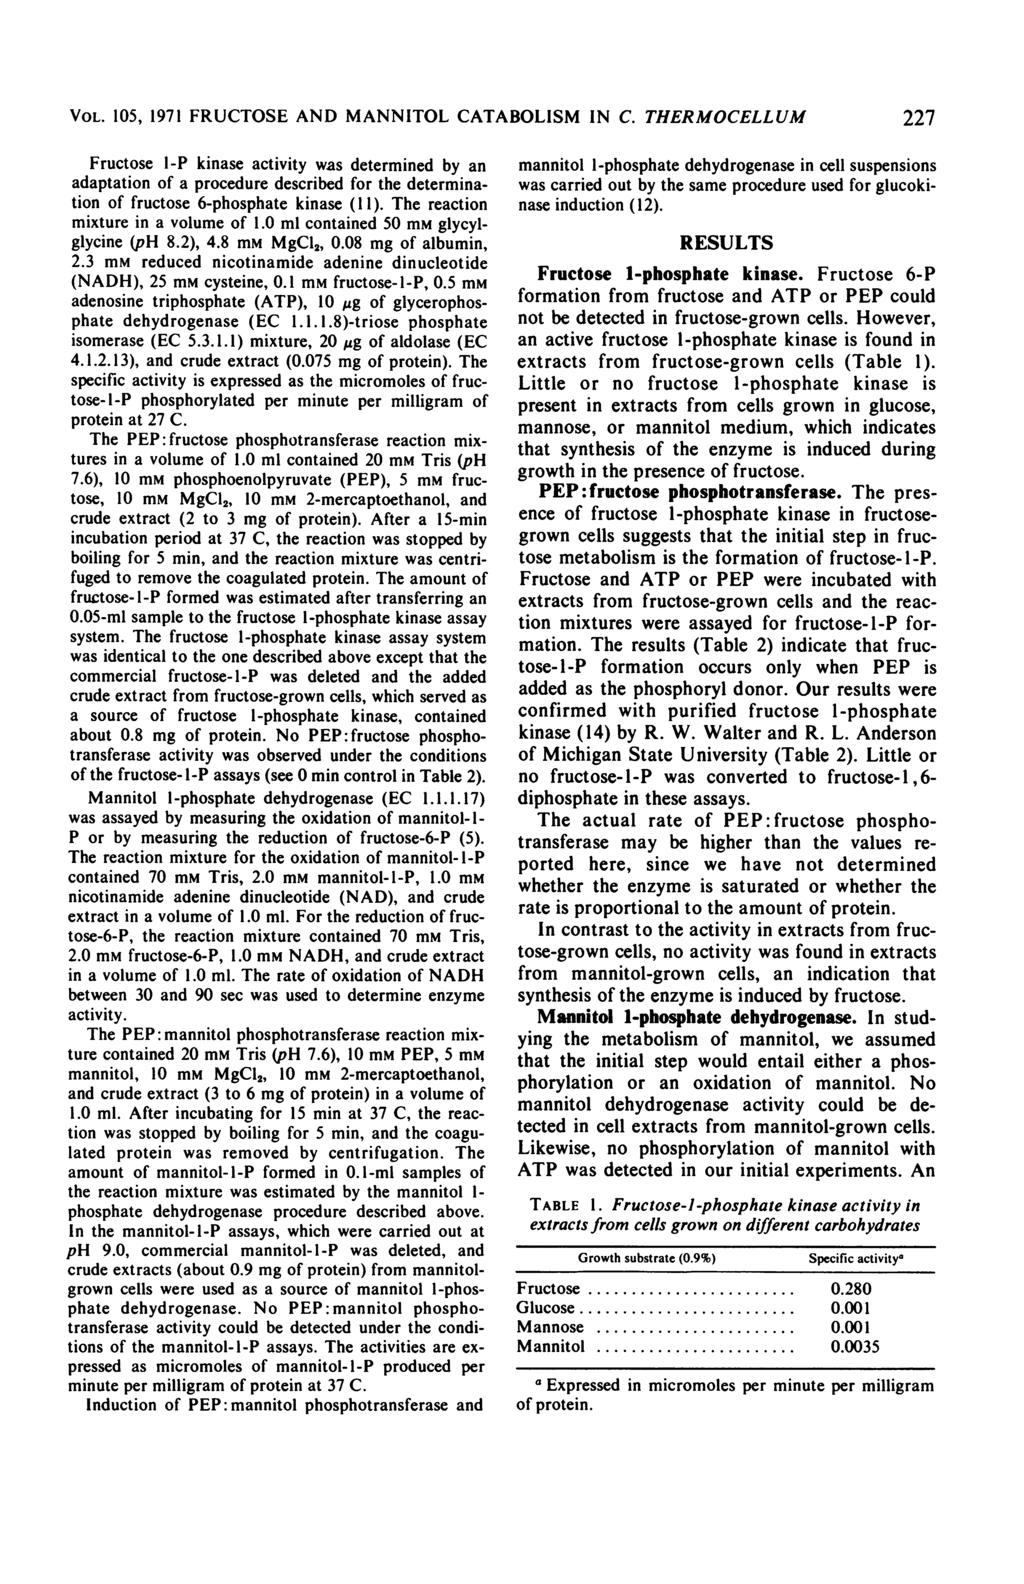 VOL. 105, 1971 FRUCTOSE AND MANNITOL CATABOLISM IN C.